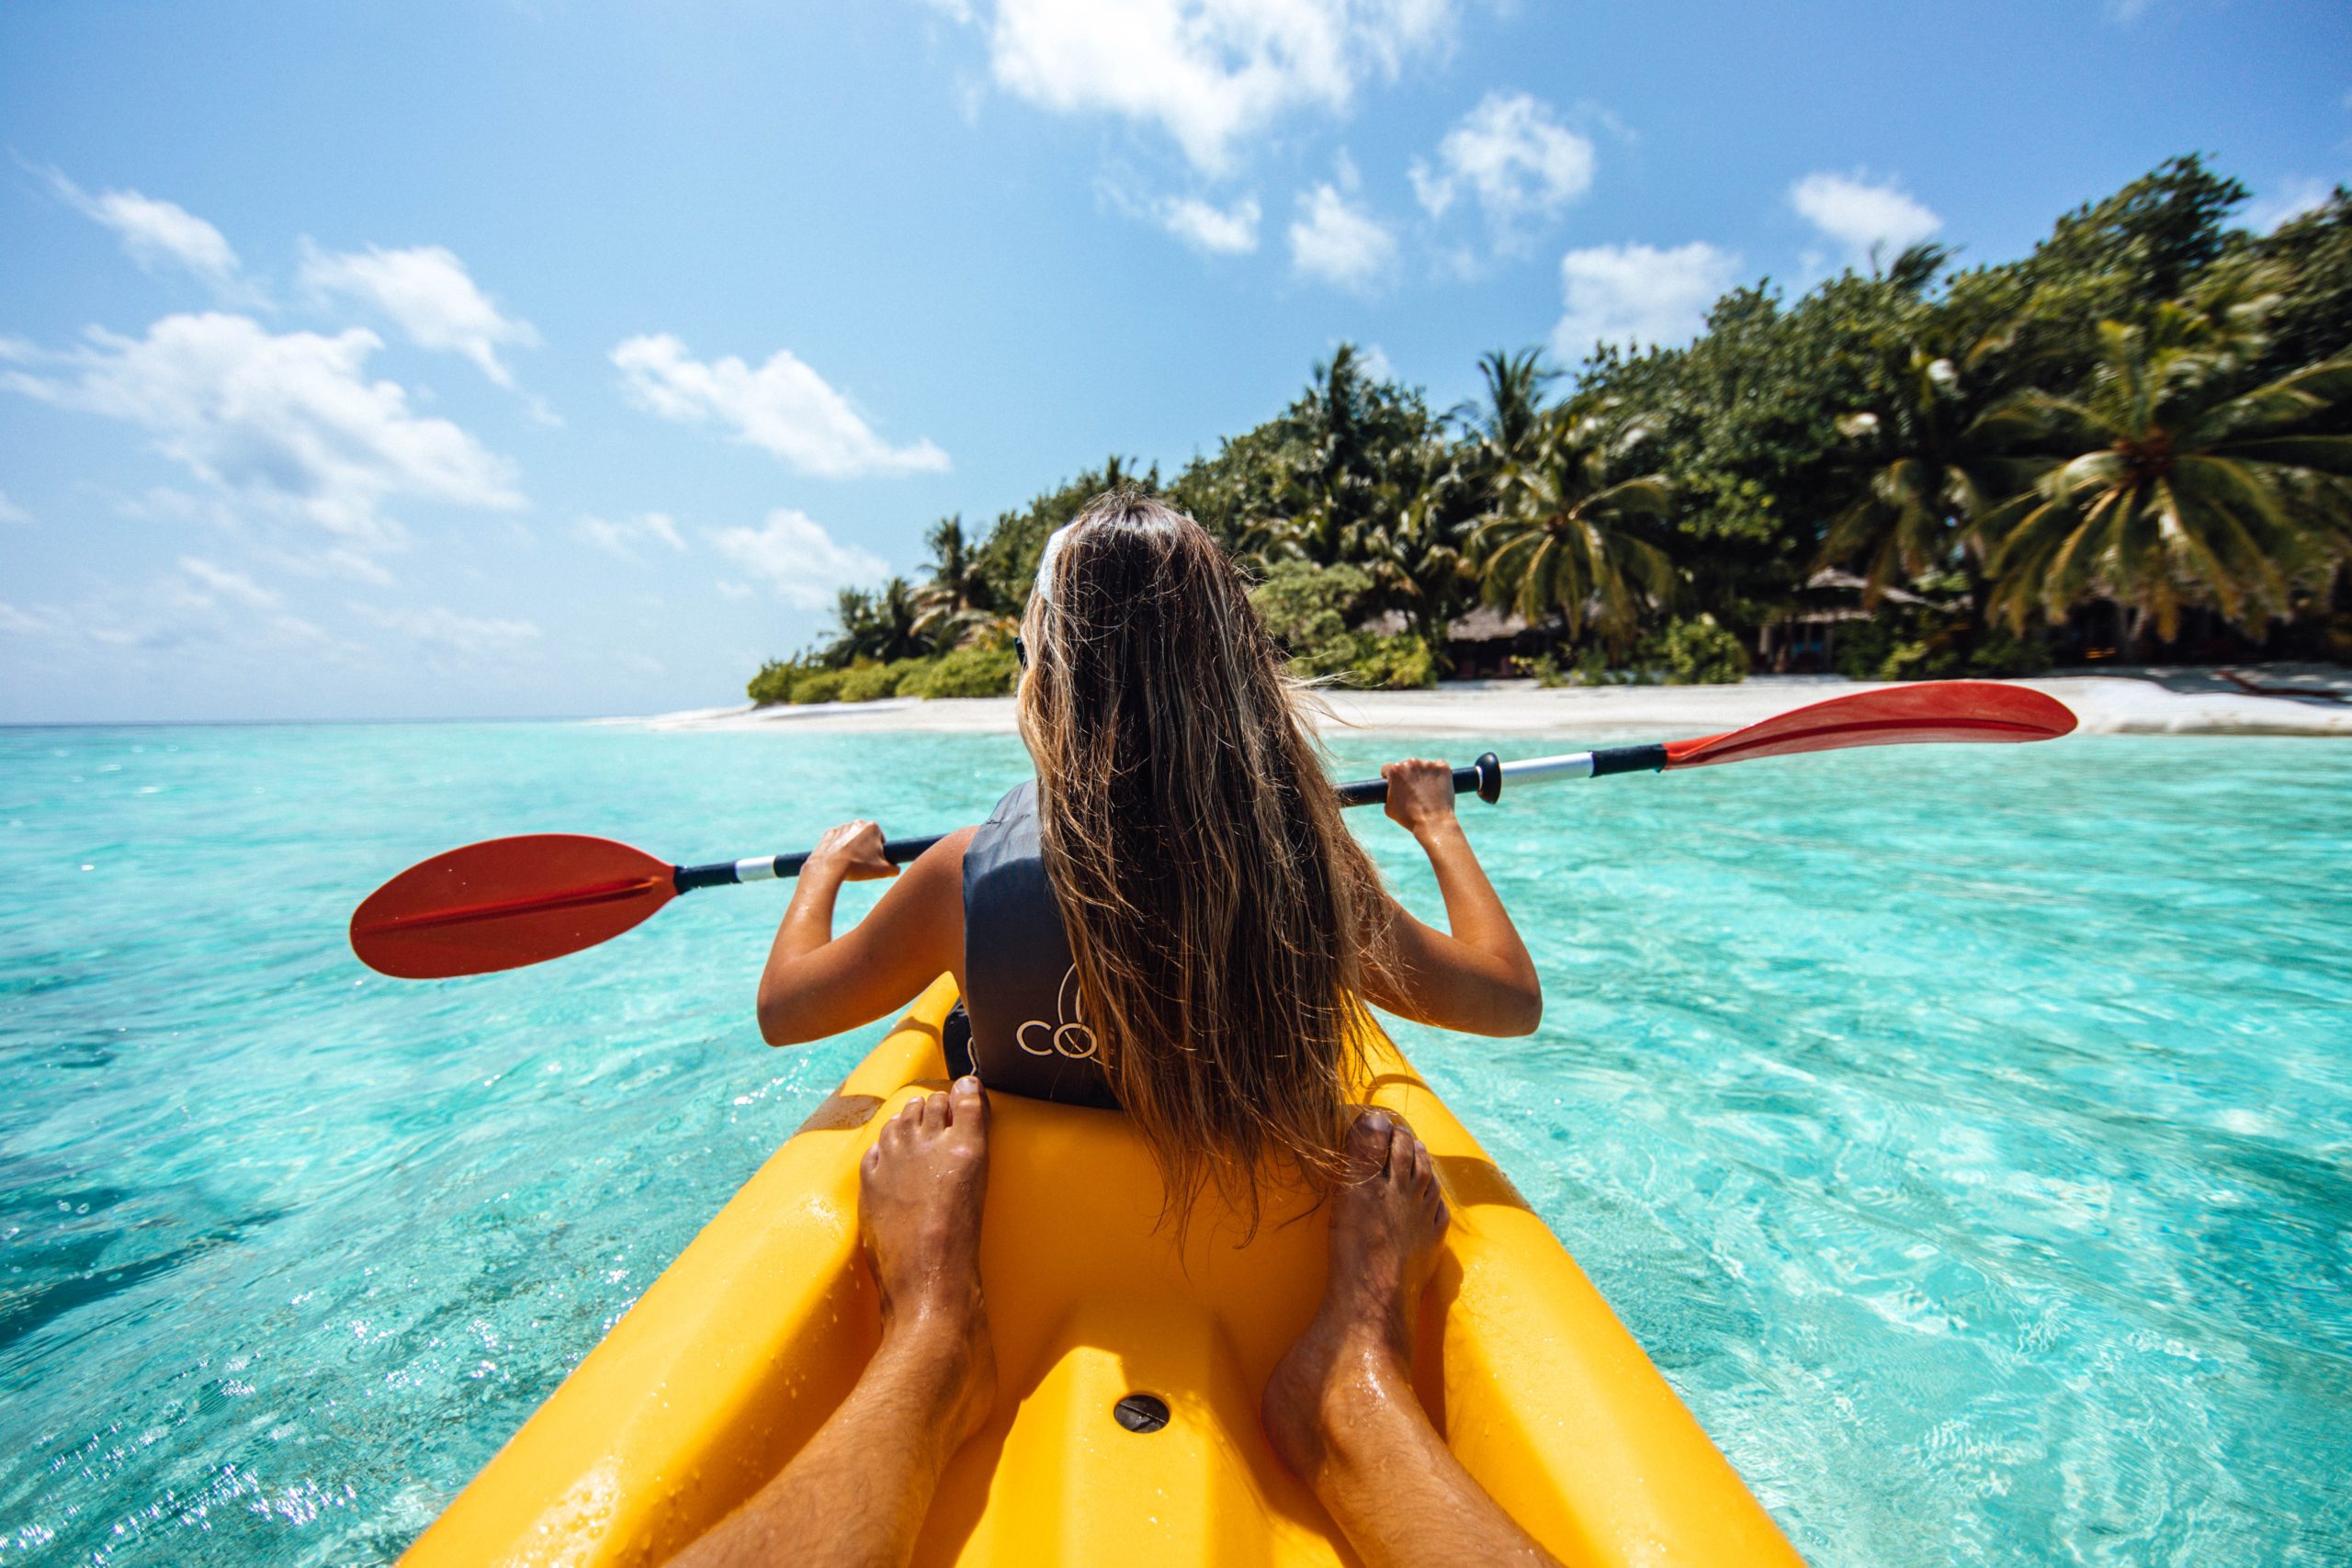 Two people sea kayaking in a tropical location